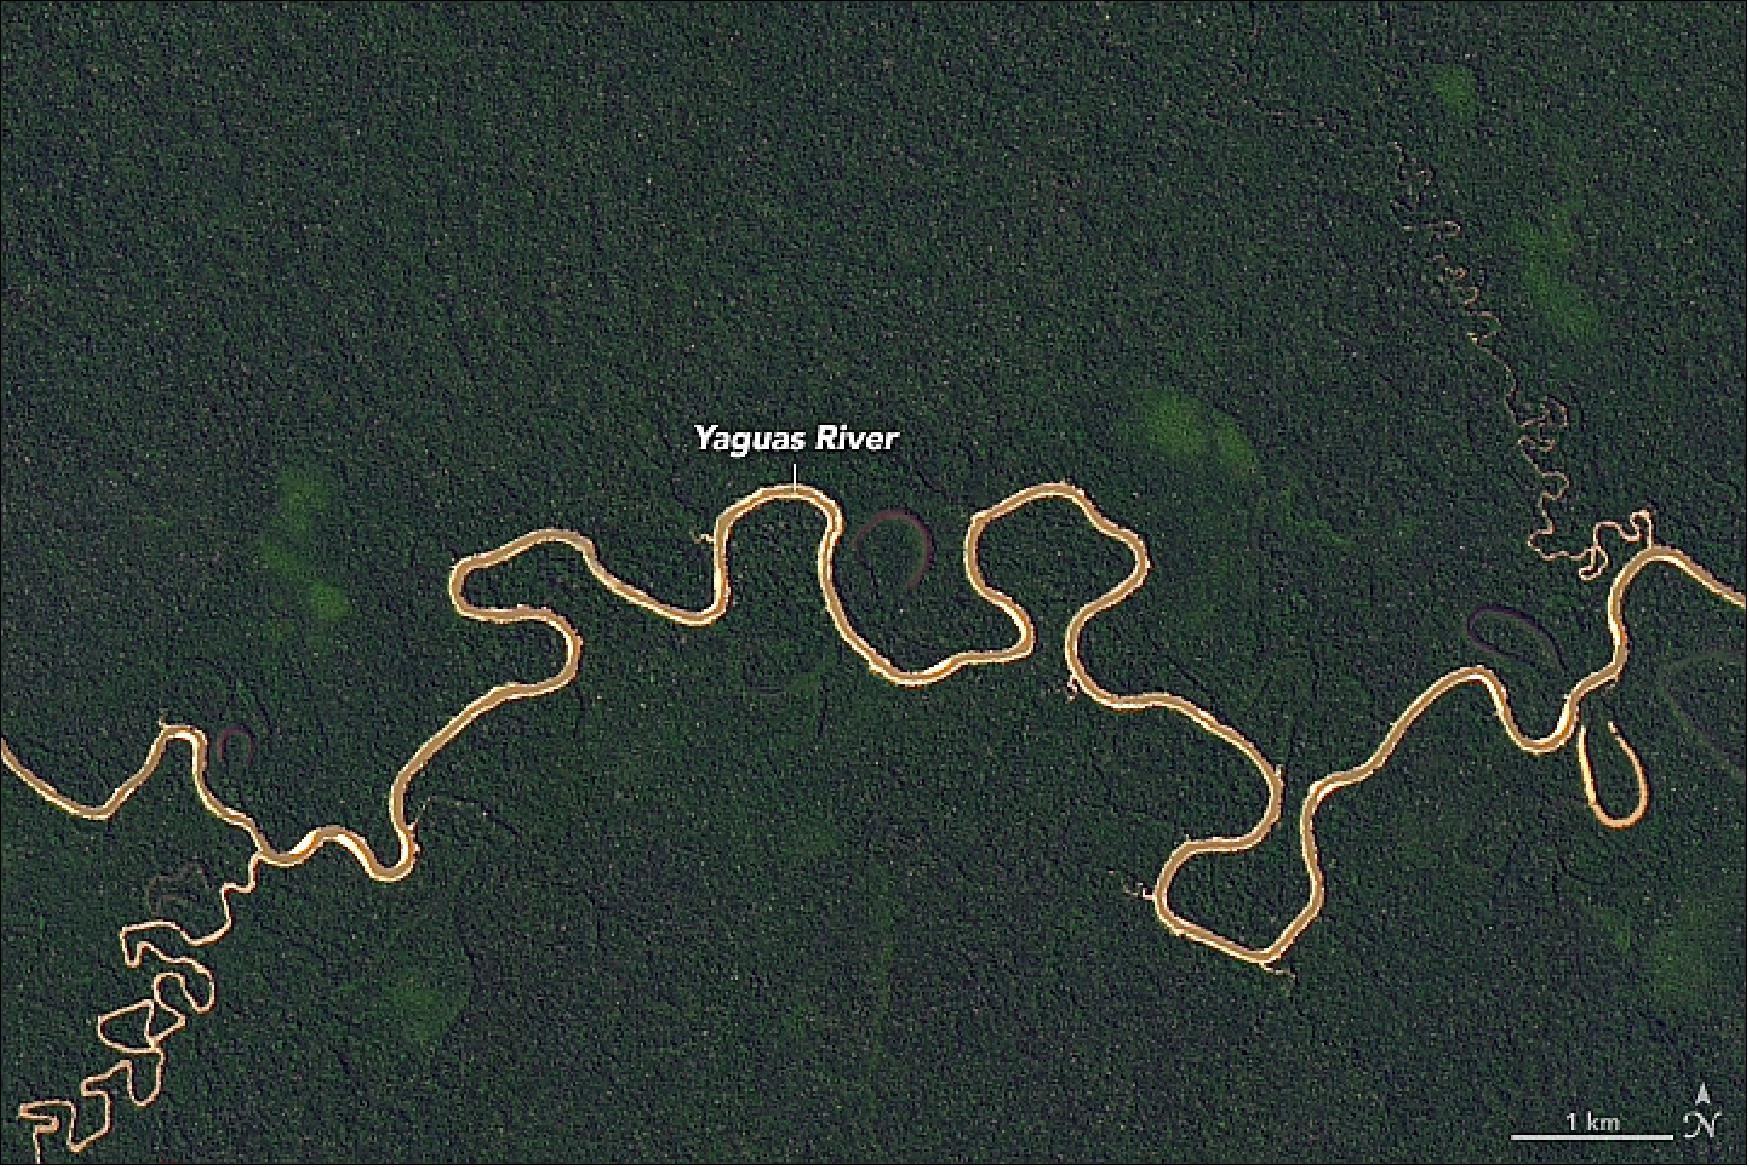 Figure 31: OLI image of the Yaguas River in the Yaguas National Park acquired on 16 Aug. 2017 (image credit: NASA Earth Observatory)